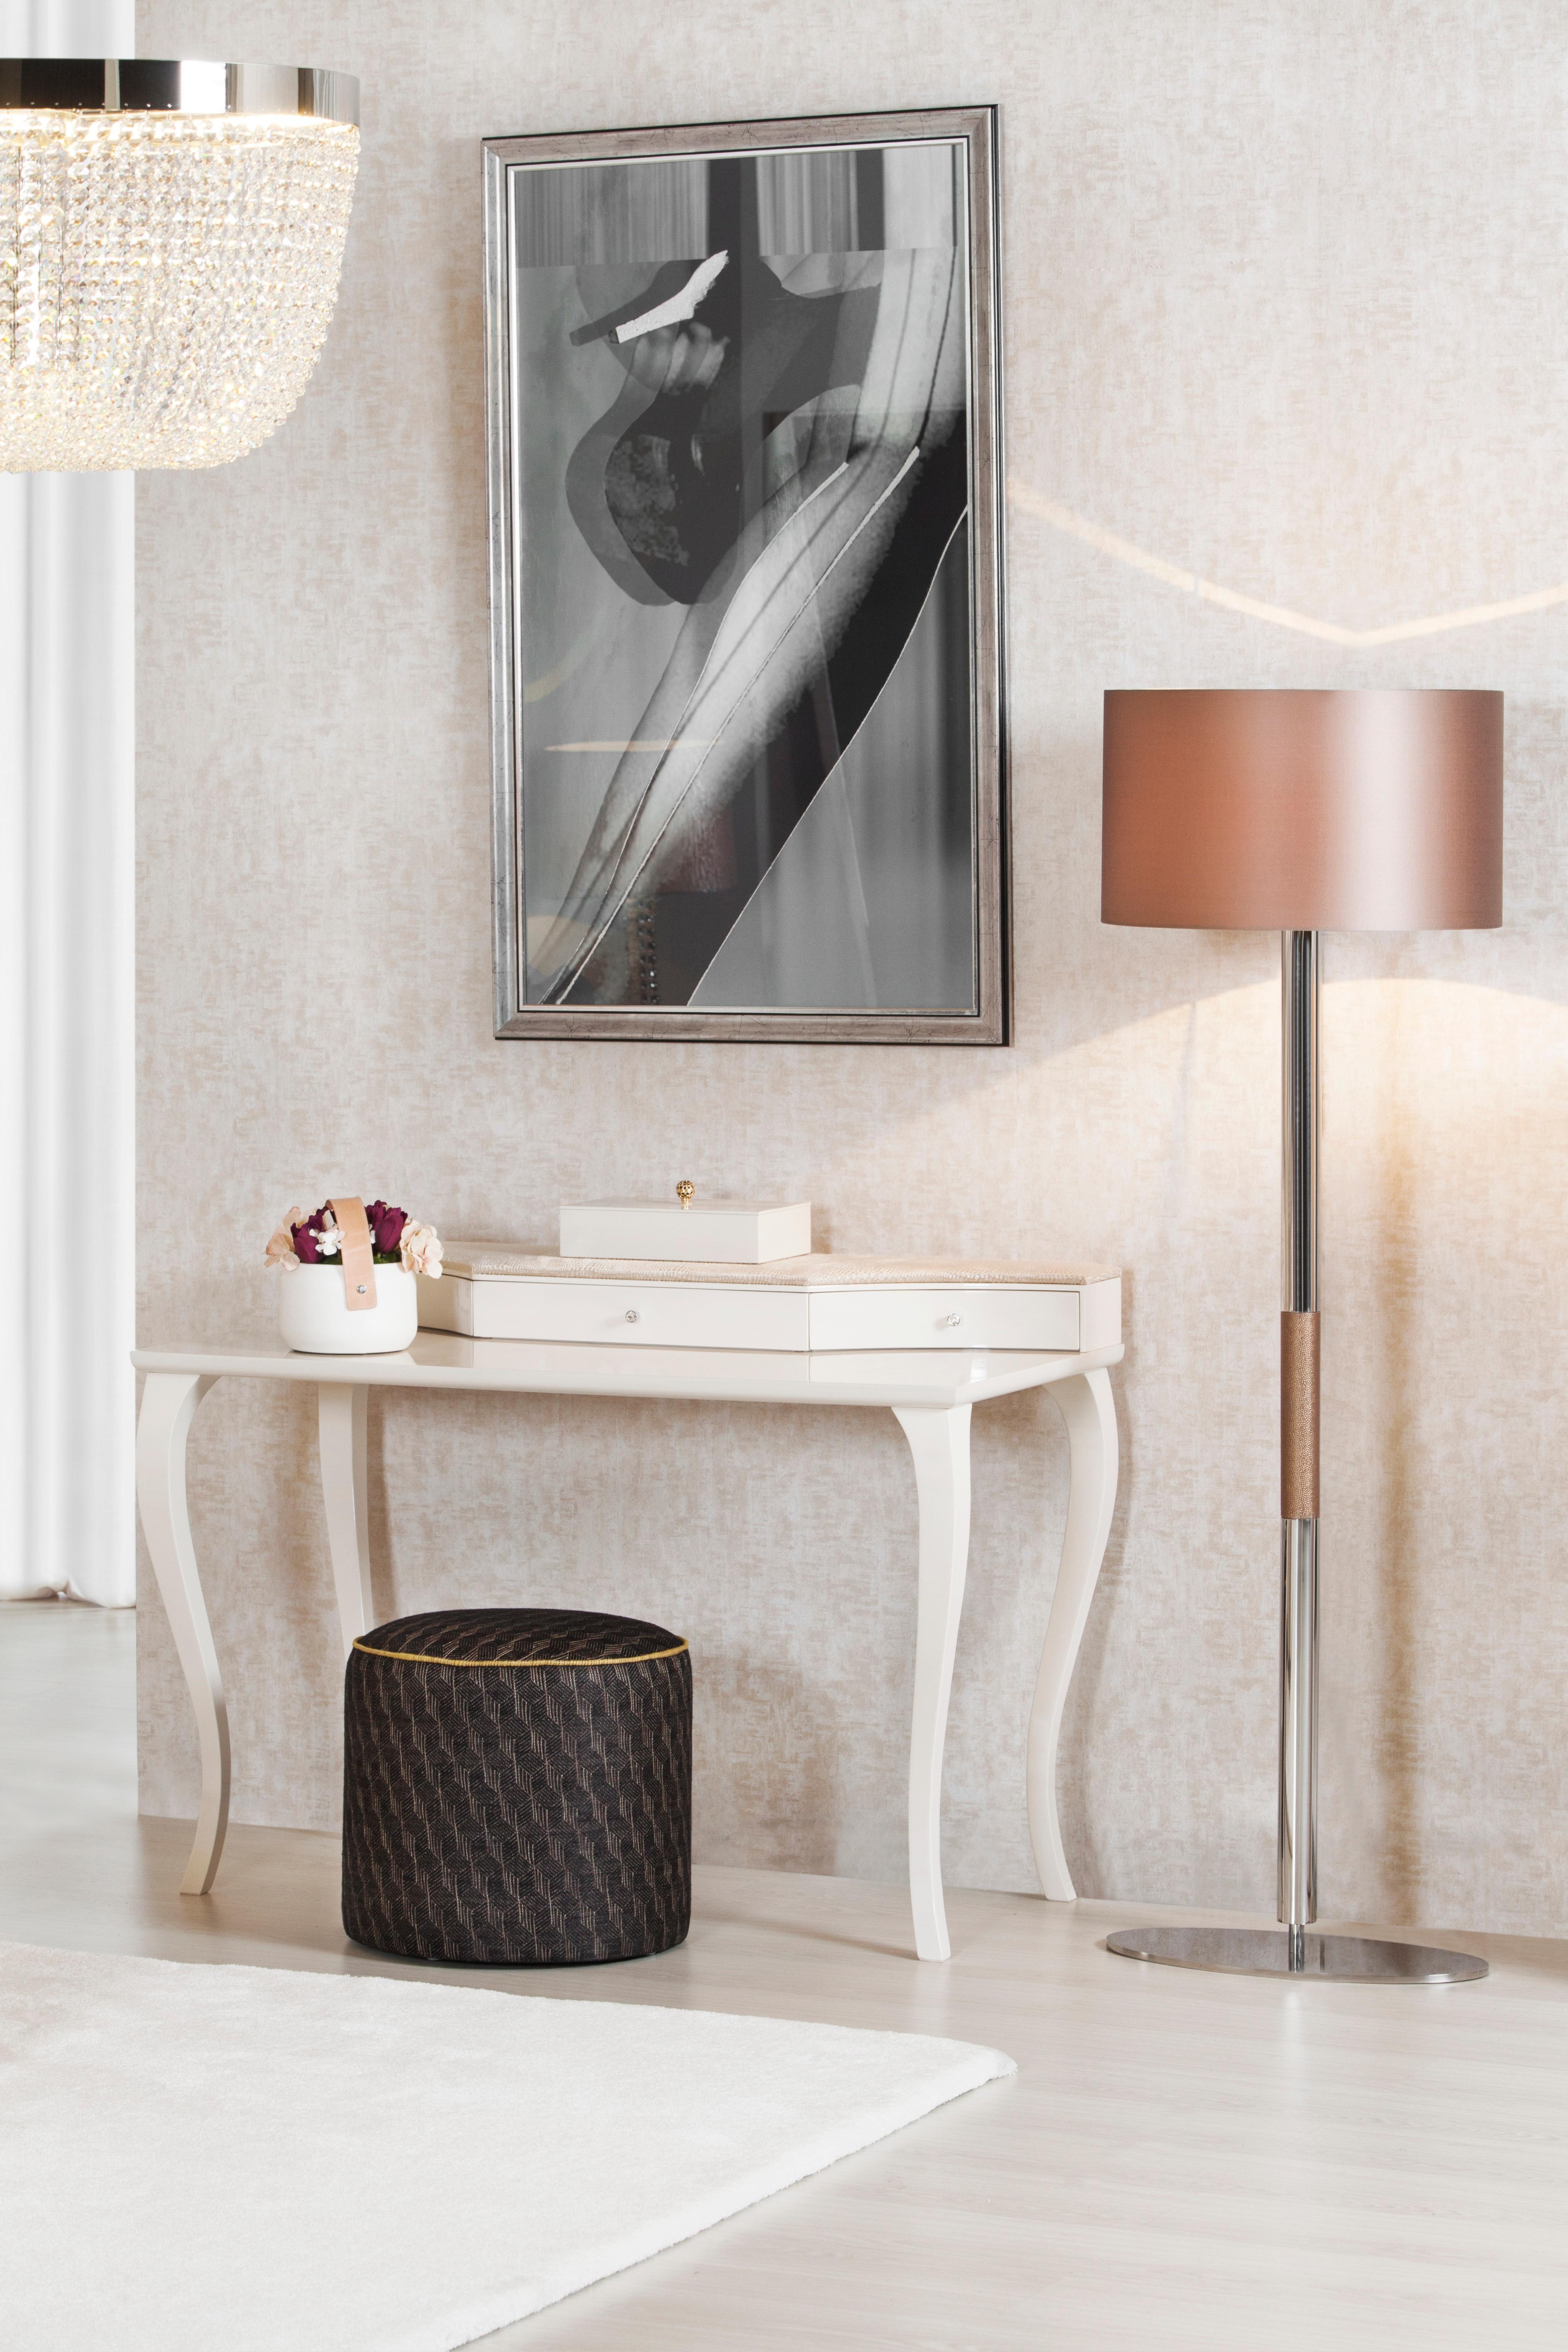 Gau Floor Lamp, Modern Collection, Handcrafted in Portugal - Europe by GF Modern.

The luxurious floor lamp Gau creates a subliminal ambience for extraordinary living. The inlay detail in Bronze faux leather harmonizes with the wonderful contrast